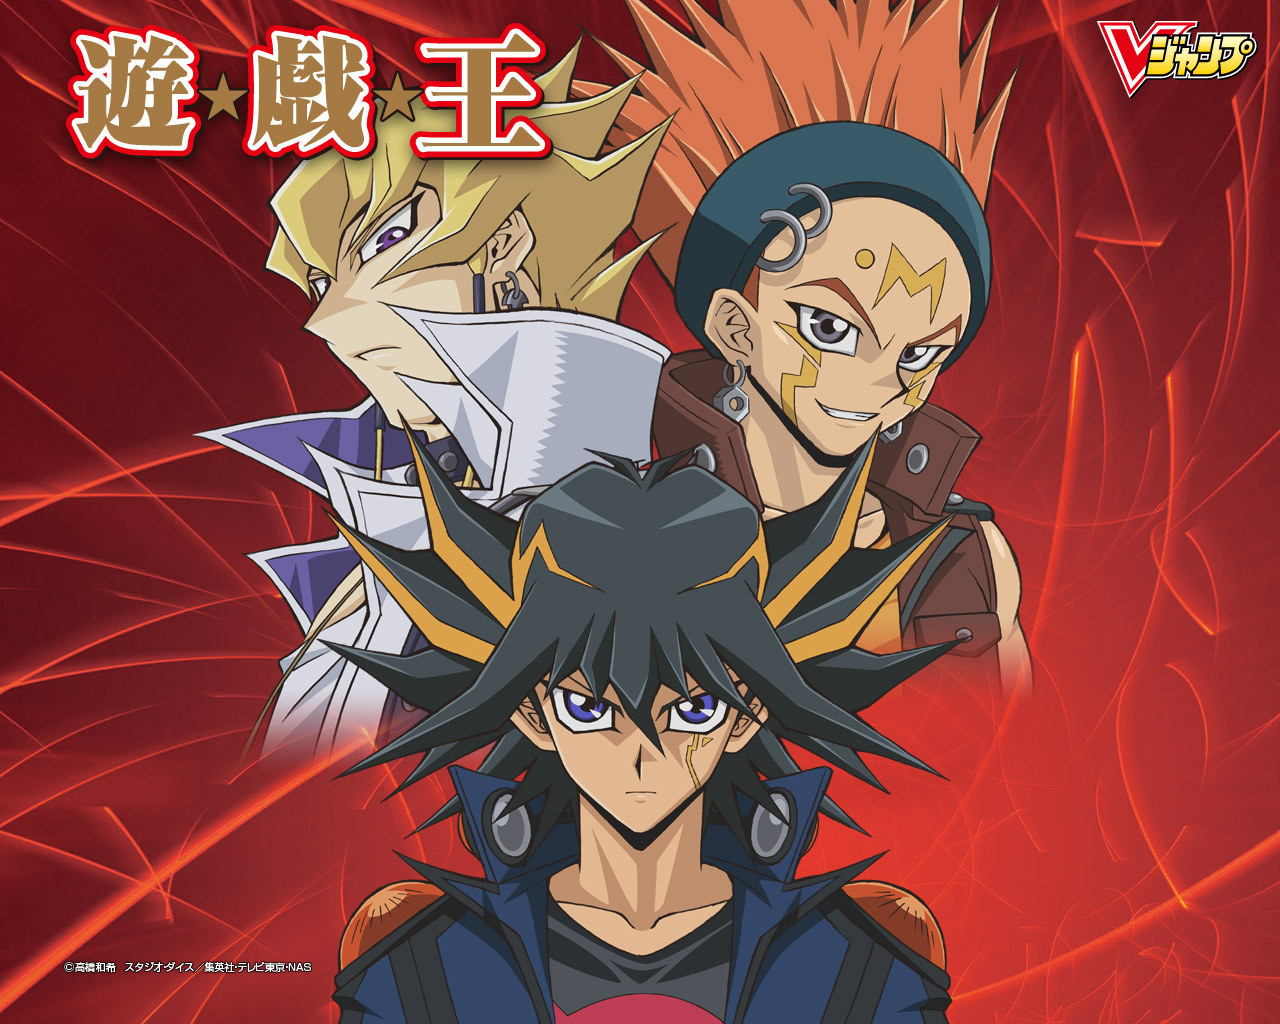 Yugioh 5ds Image Jack Crow And Yusei HD Wallpaper